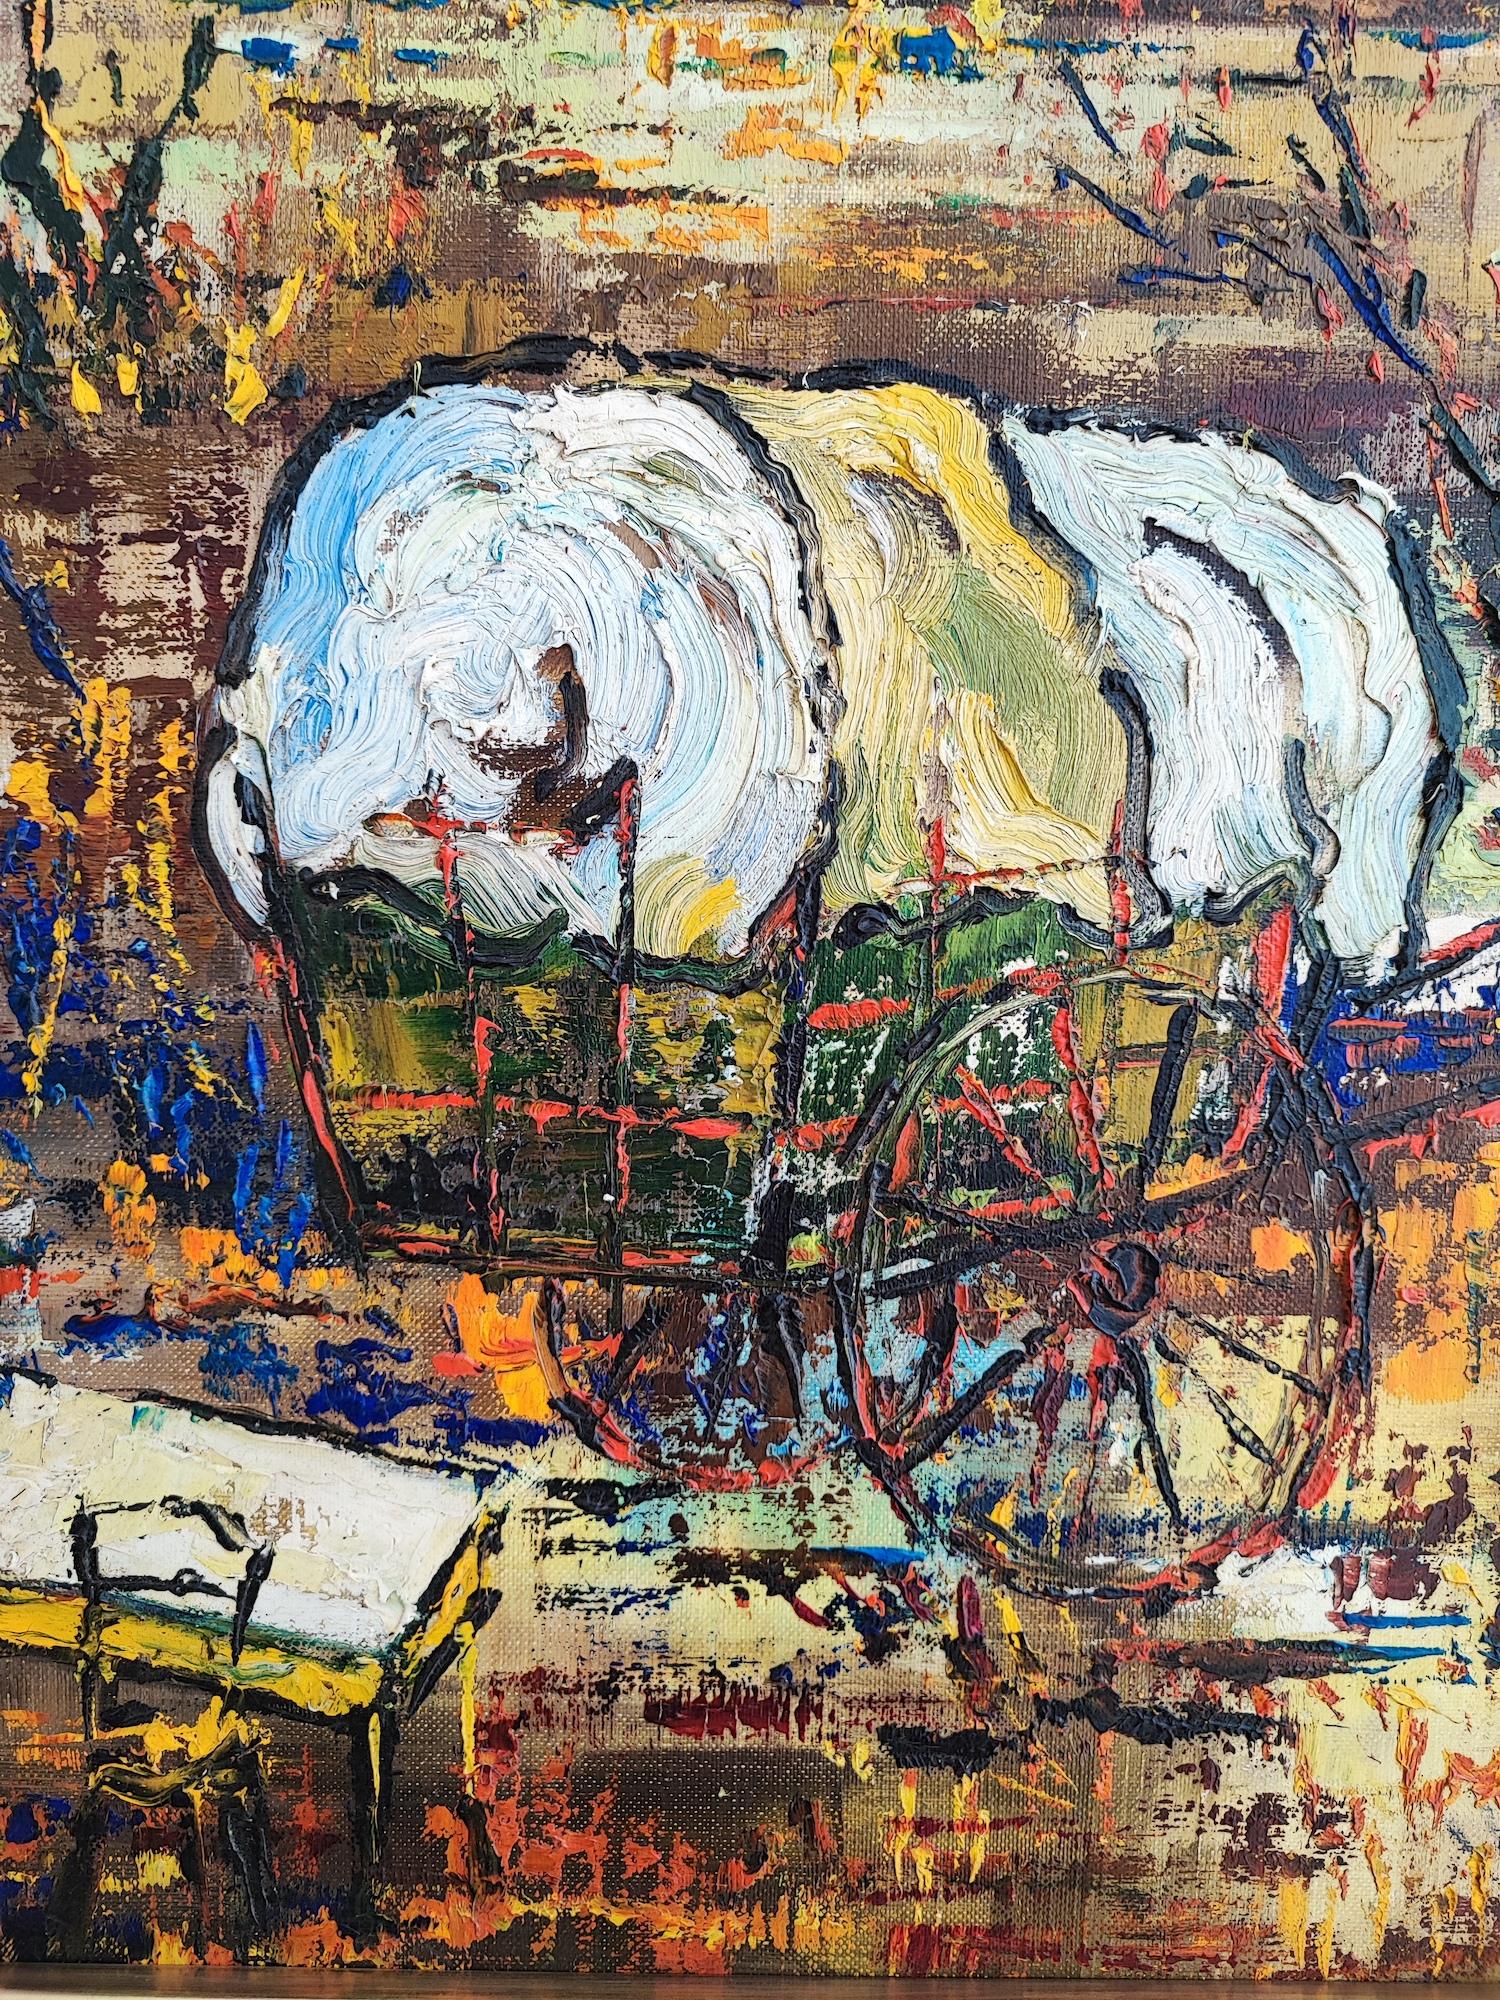 Hut and caravan in the Camargue - Brown Abstract Painting by Gilbert Chavan